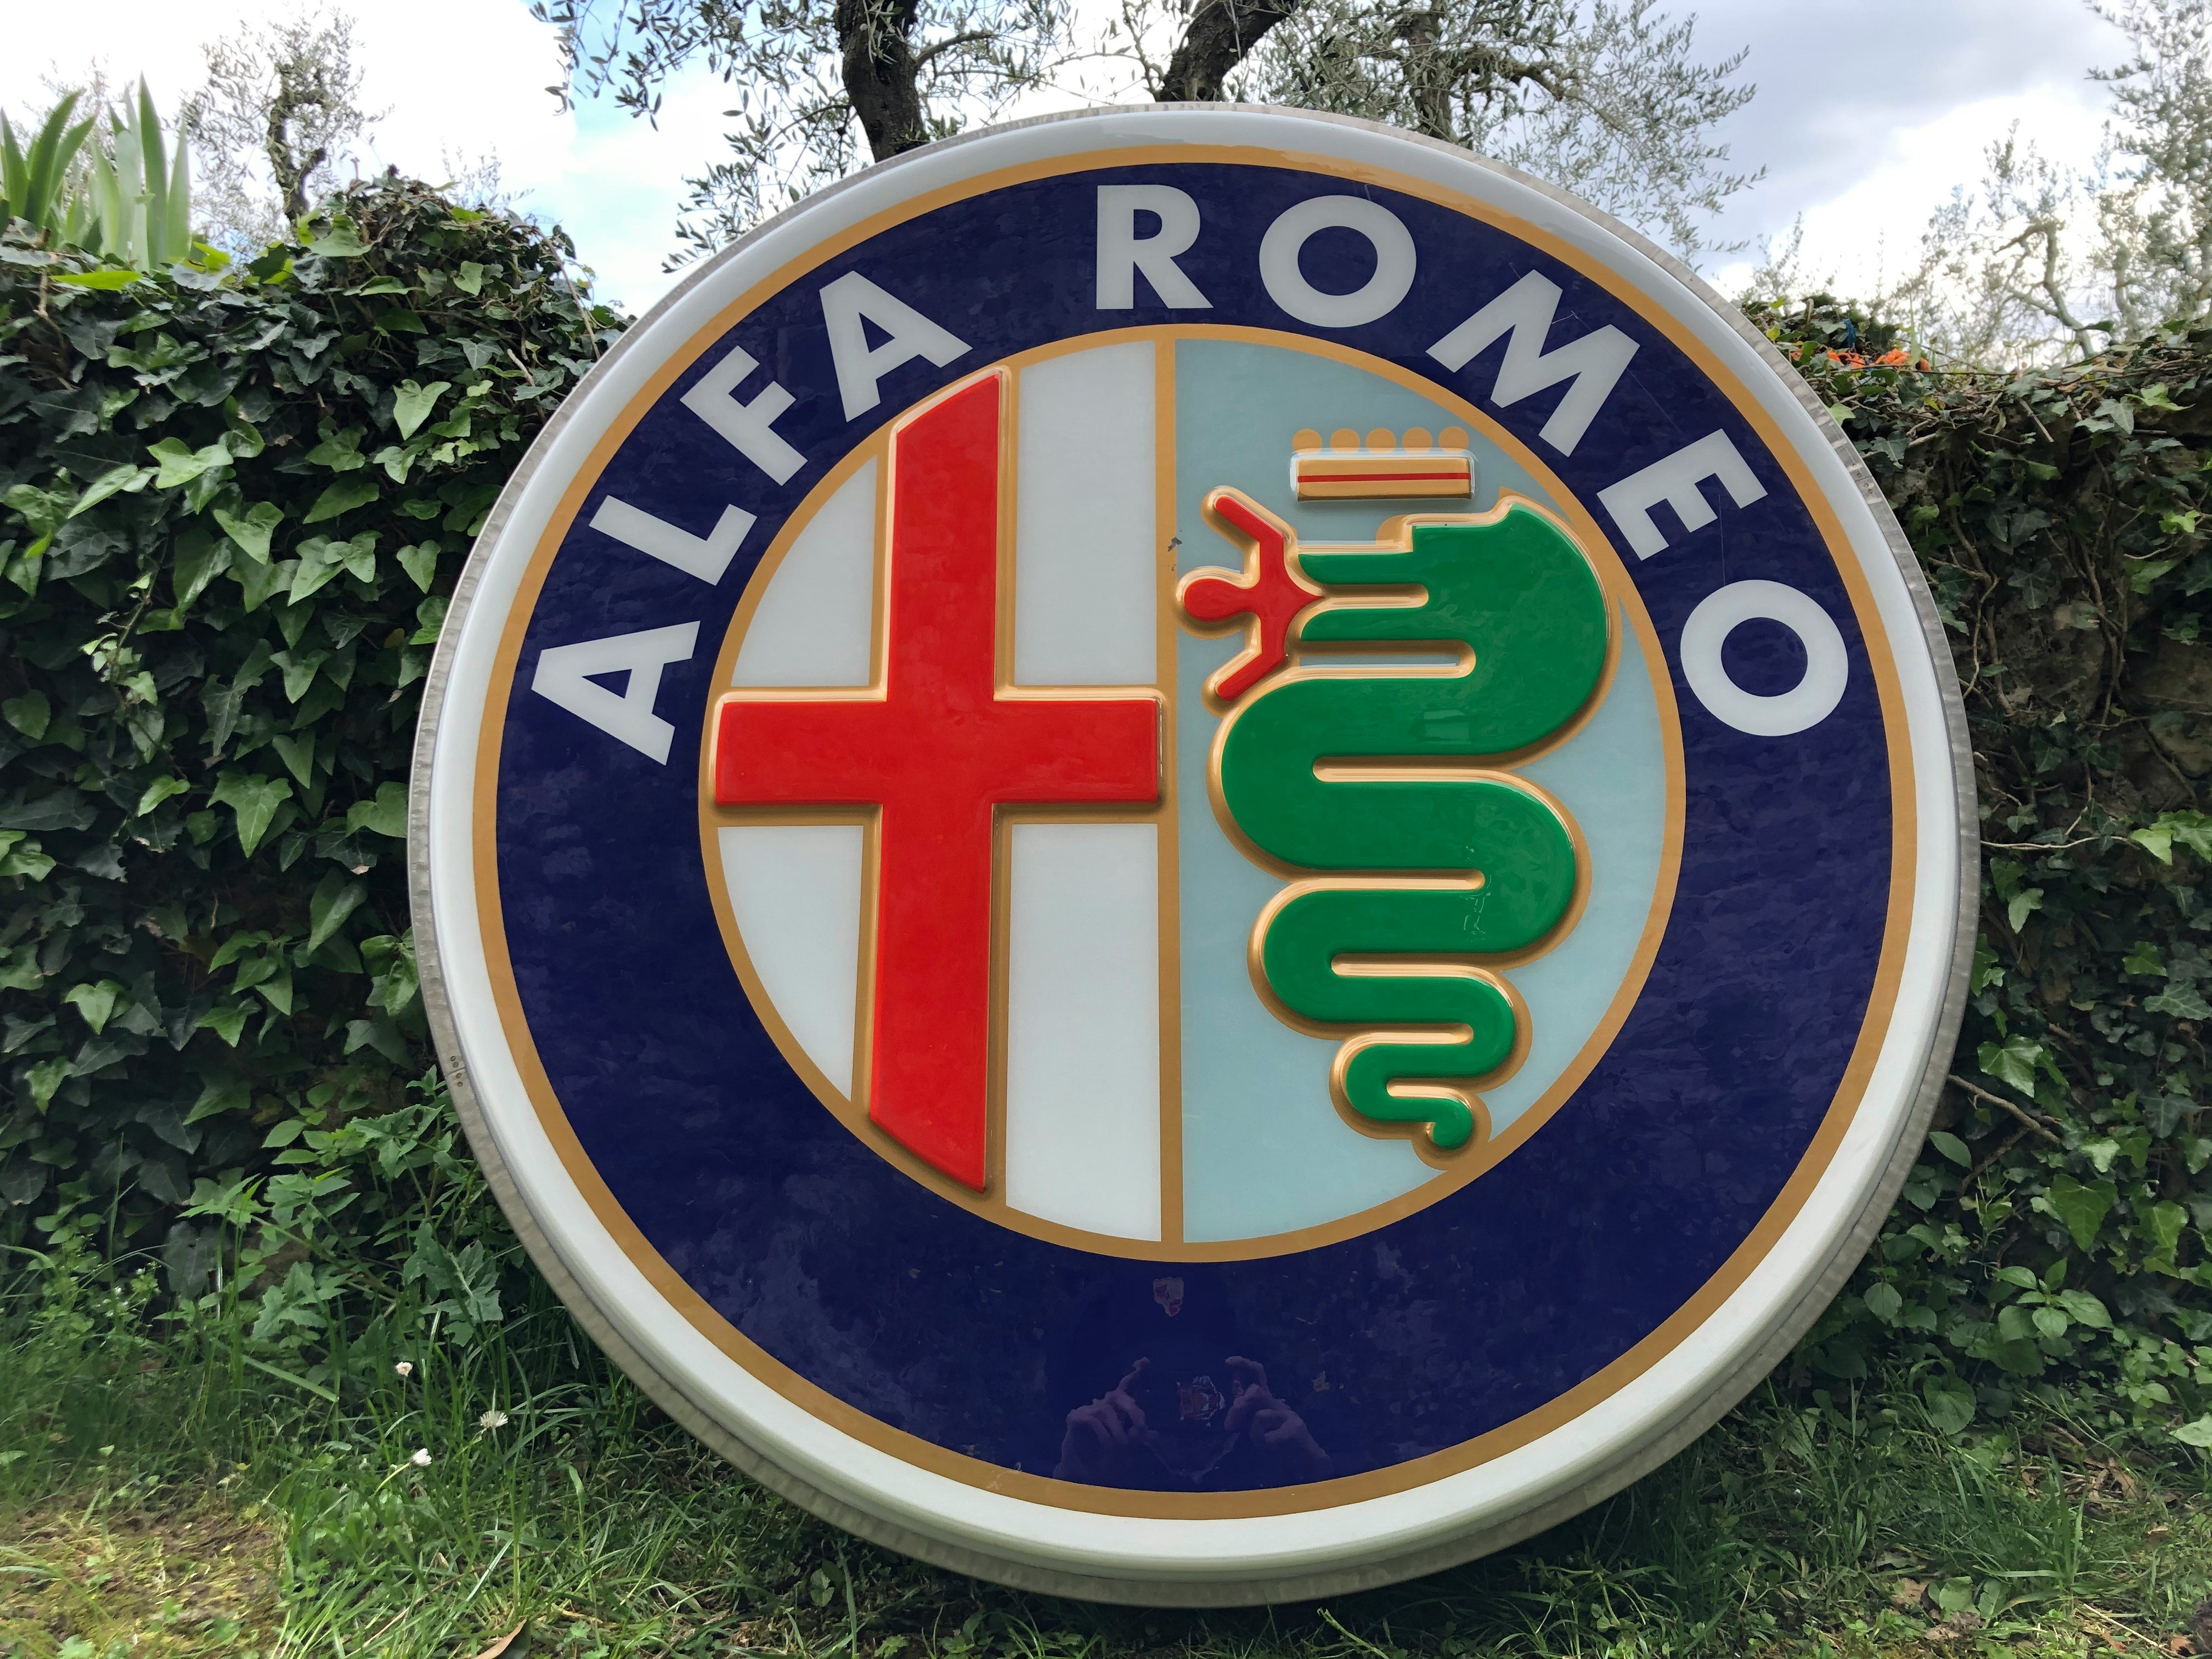 ALFA ROMEO DOUBLE SIDED ILLUMINATED SIGN for sale by auction in Siena, Italy